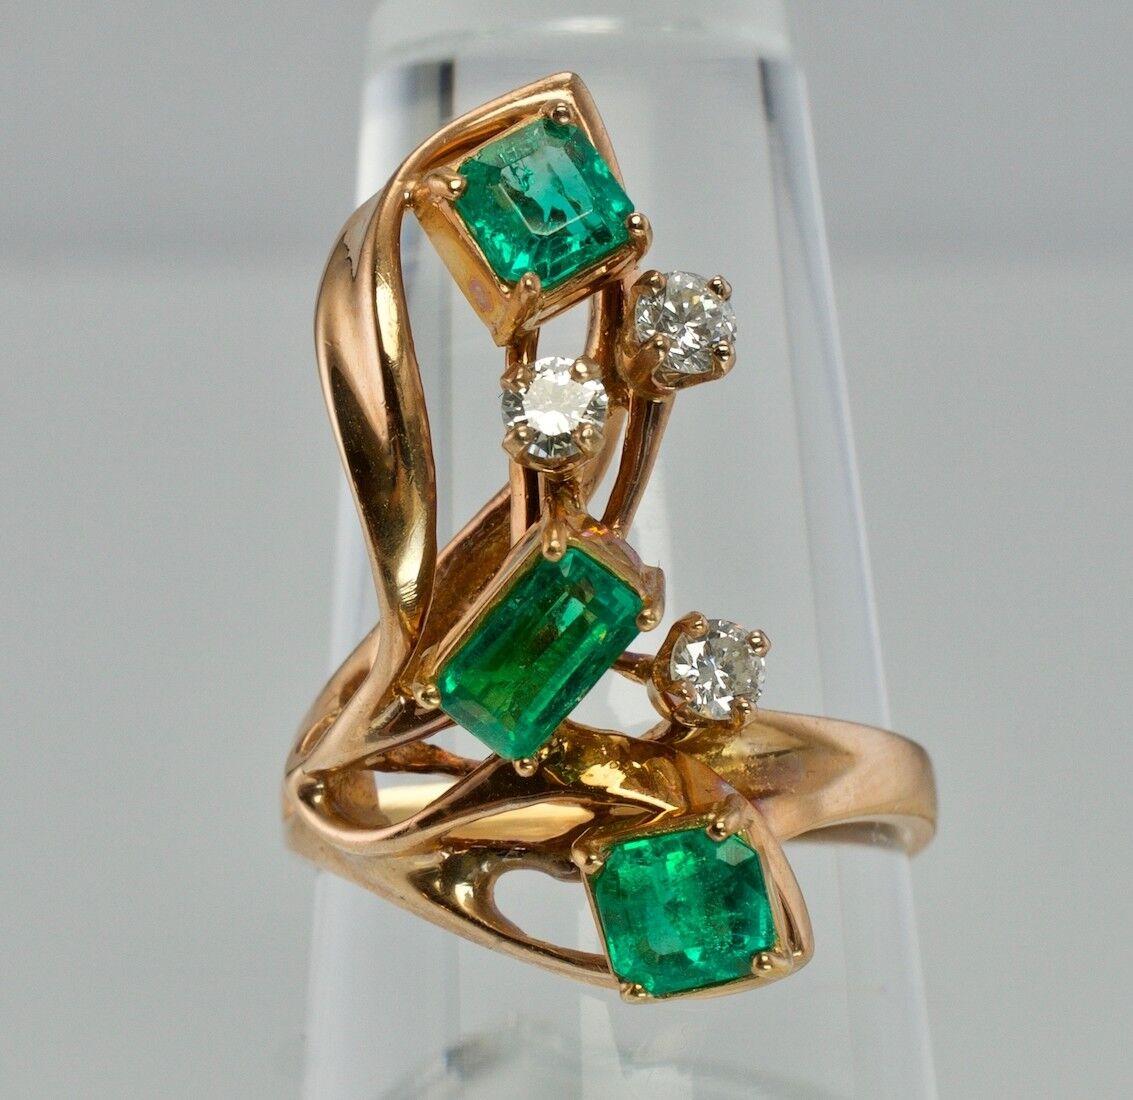 This spectacular vintage treasure is finely crafted in solid 14K Rose gold and set with high-quality Colombian Emeralds and diamonds. It is hallmarked with 